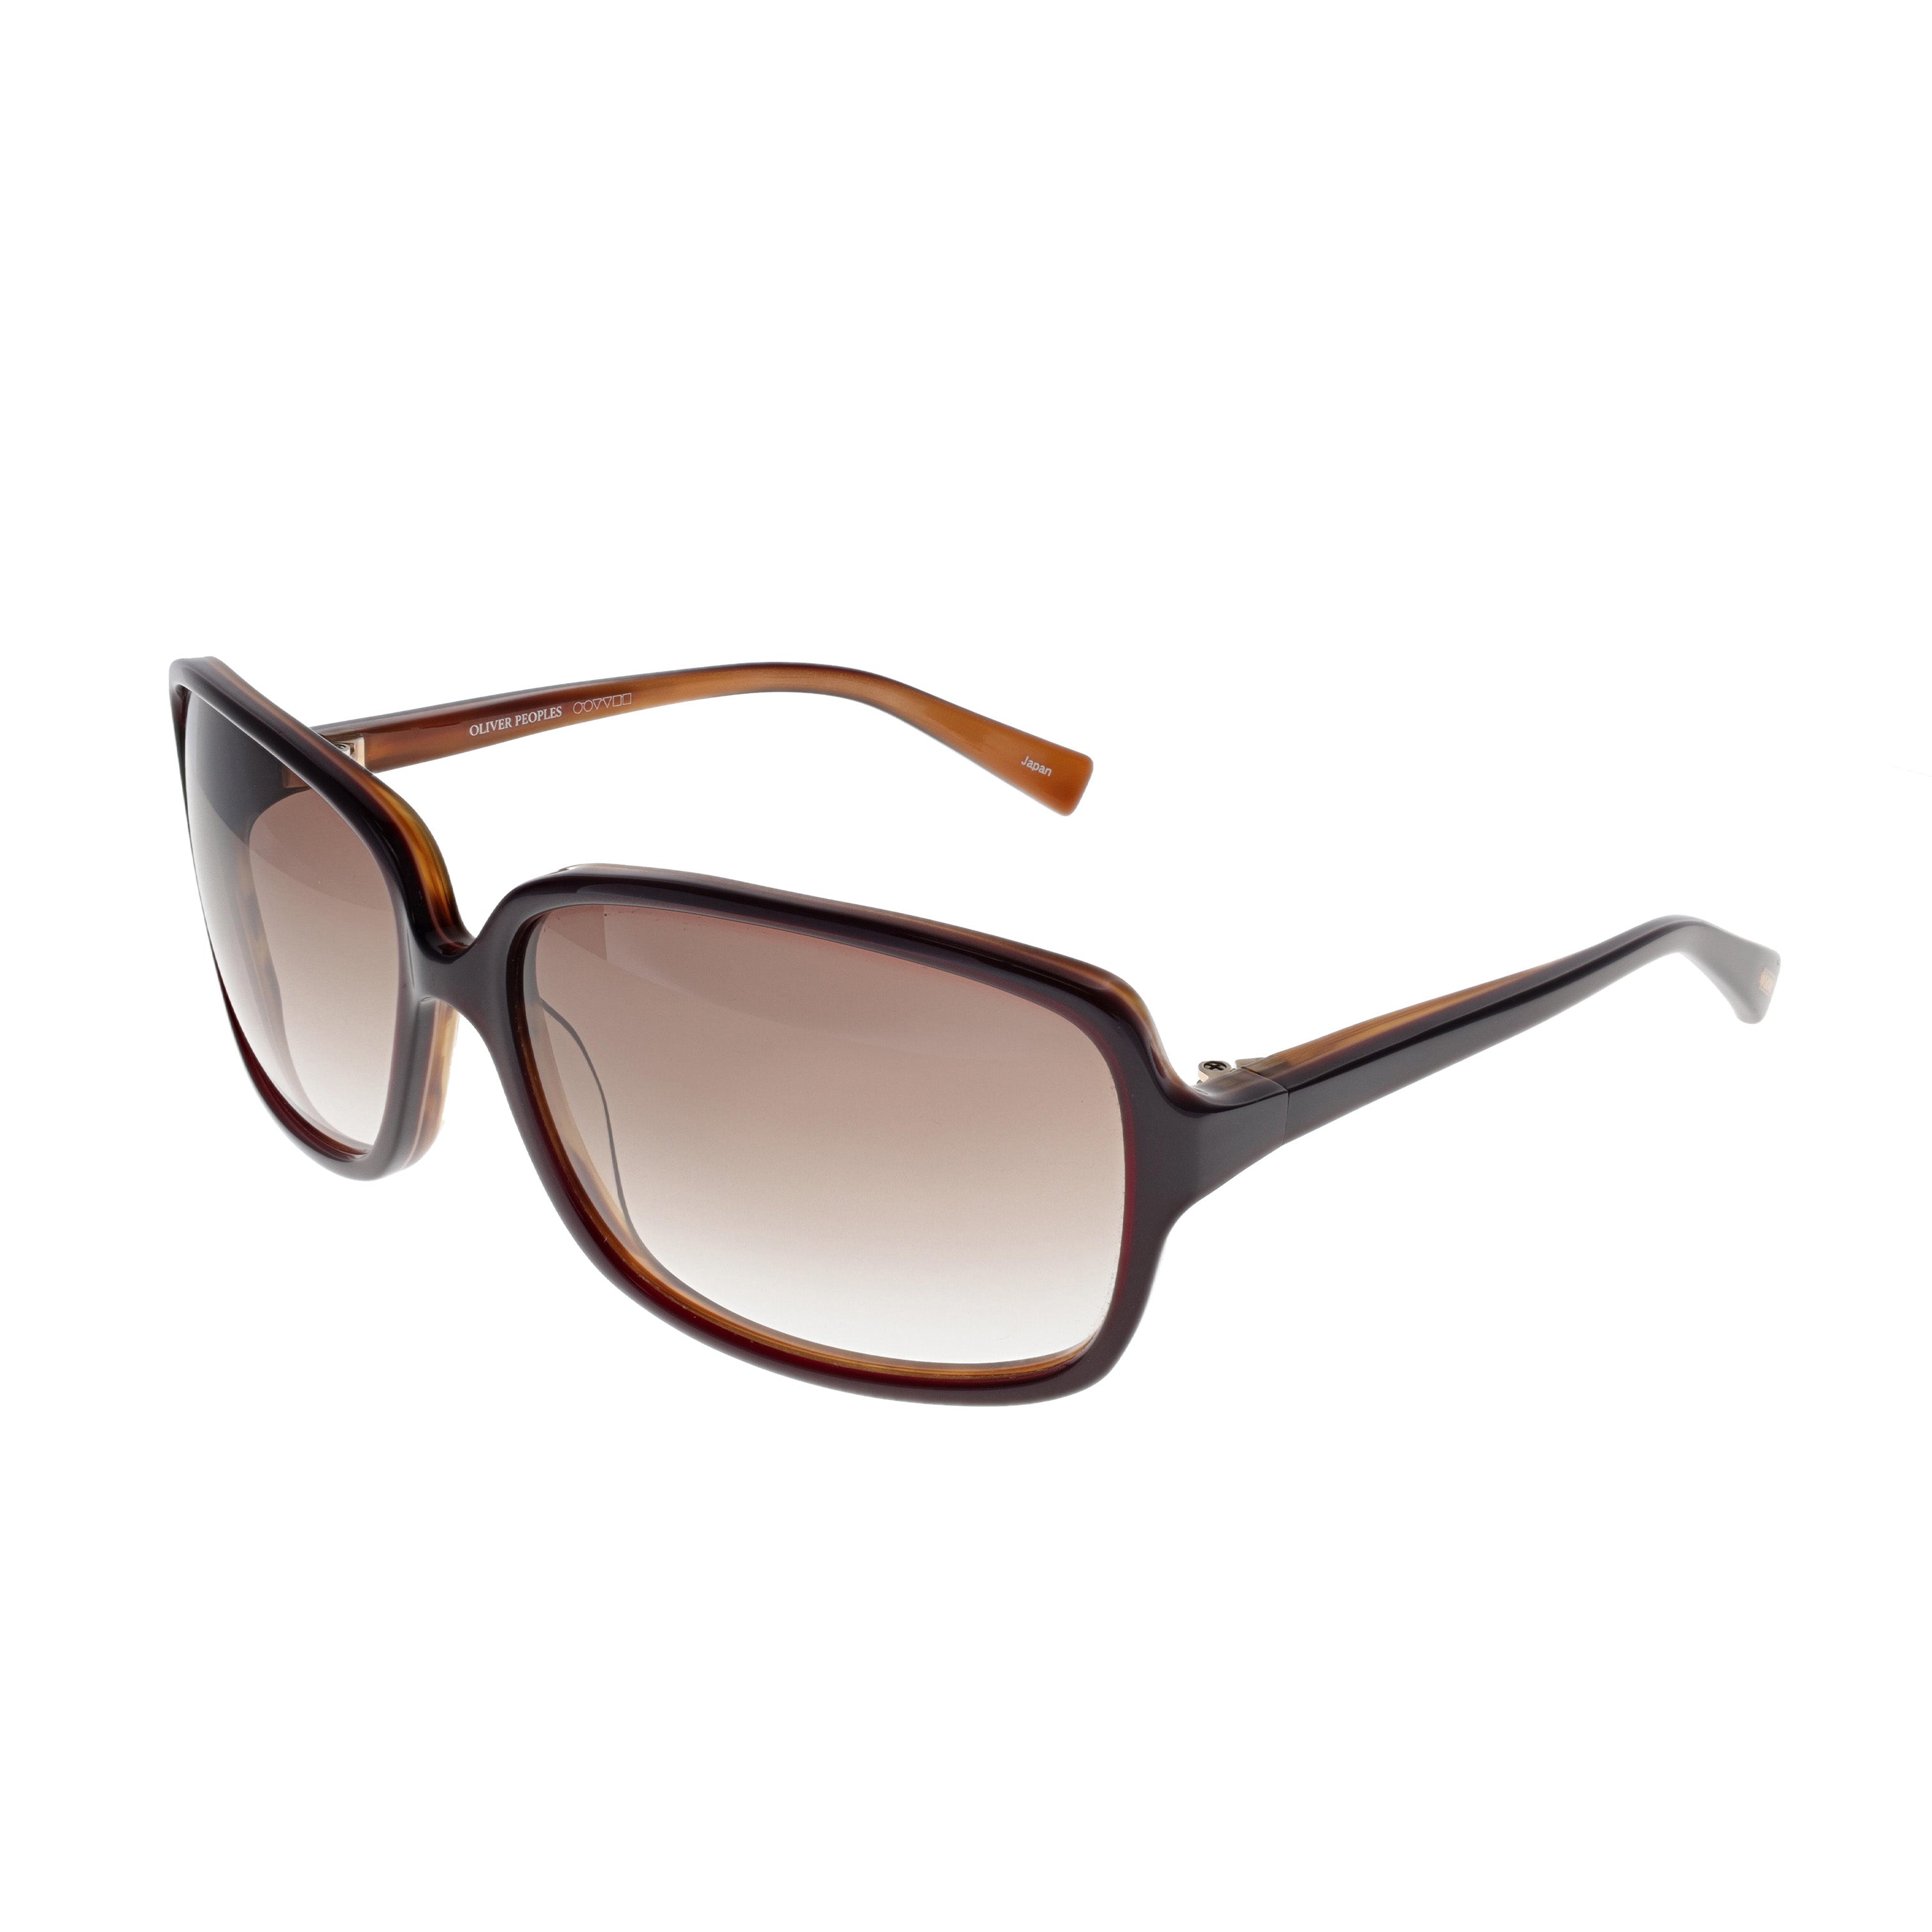 Oliver Peoples Bacall Sunglasses - SISYC